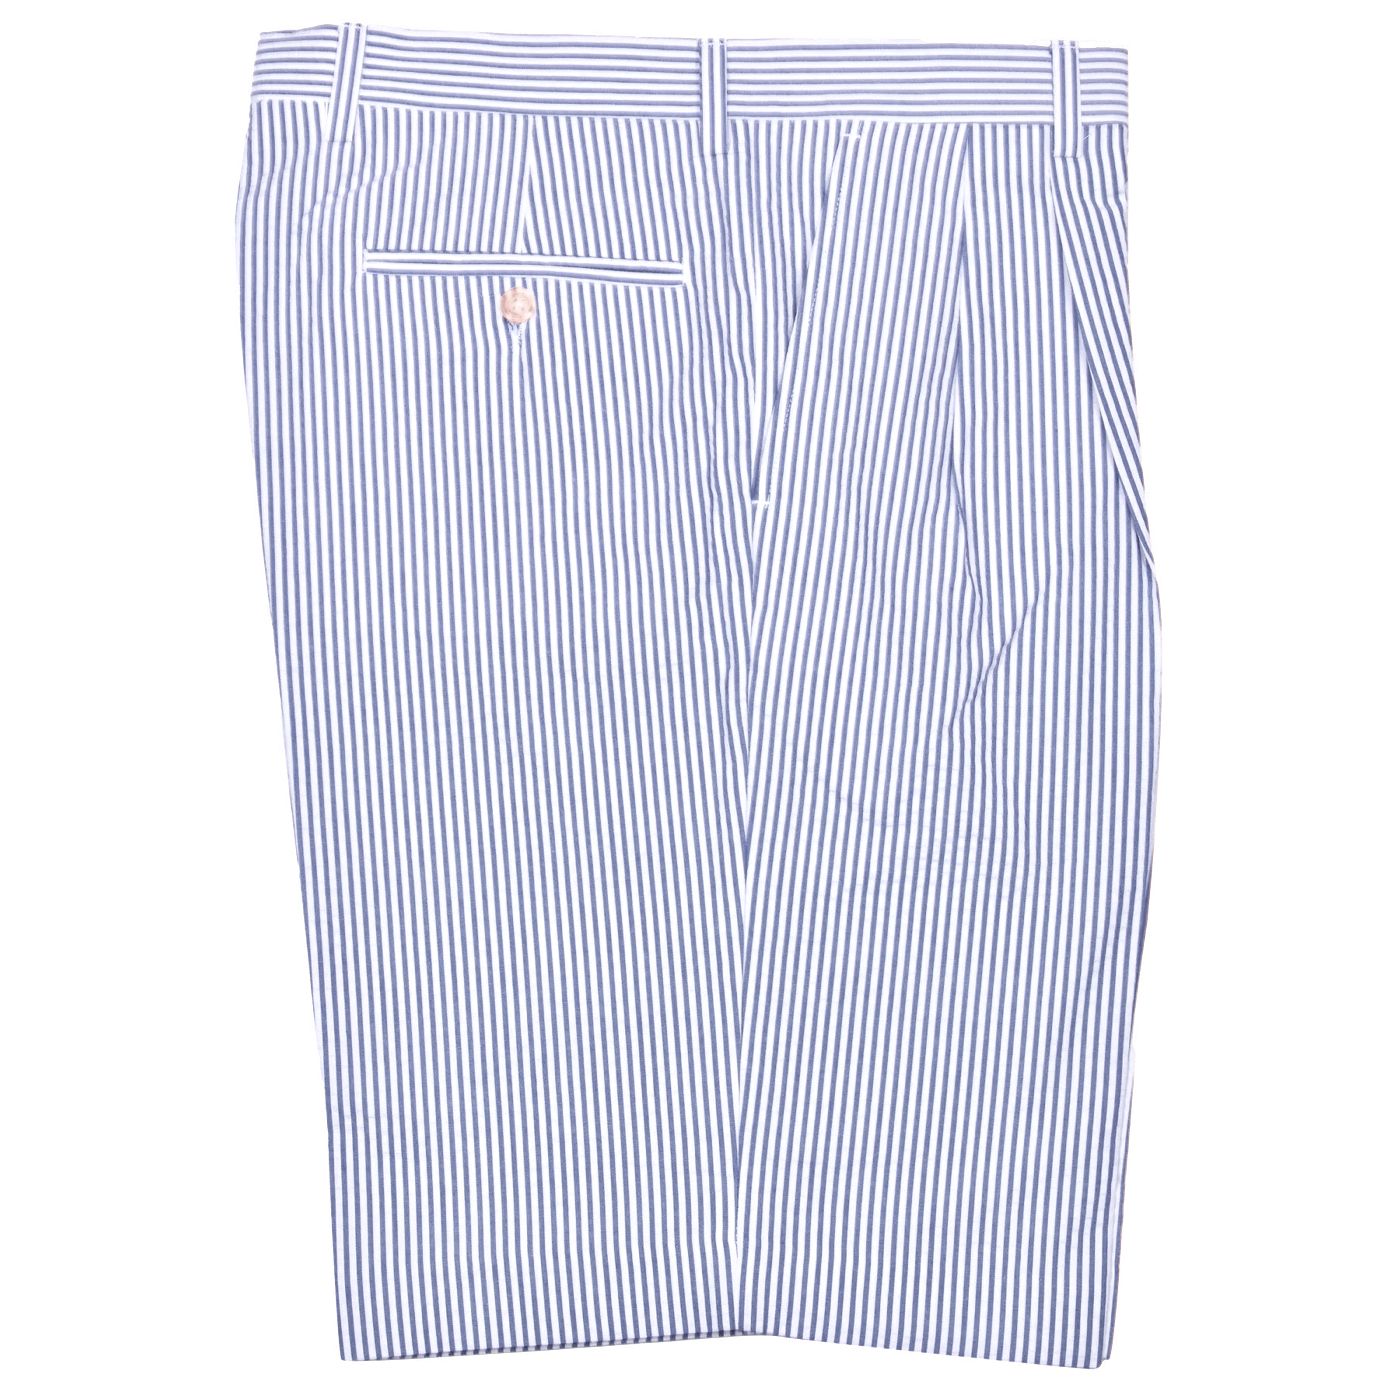 Seersucker Pleated Cotton Short in Navy and White (Ascot Double Reverse Pleat) by Berle